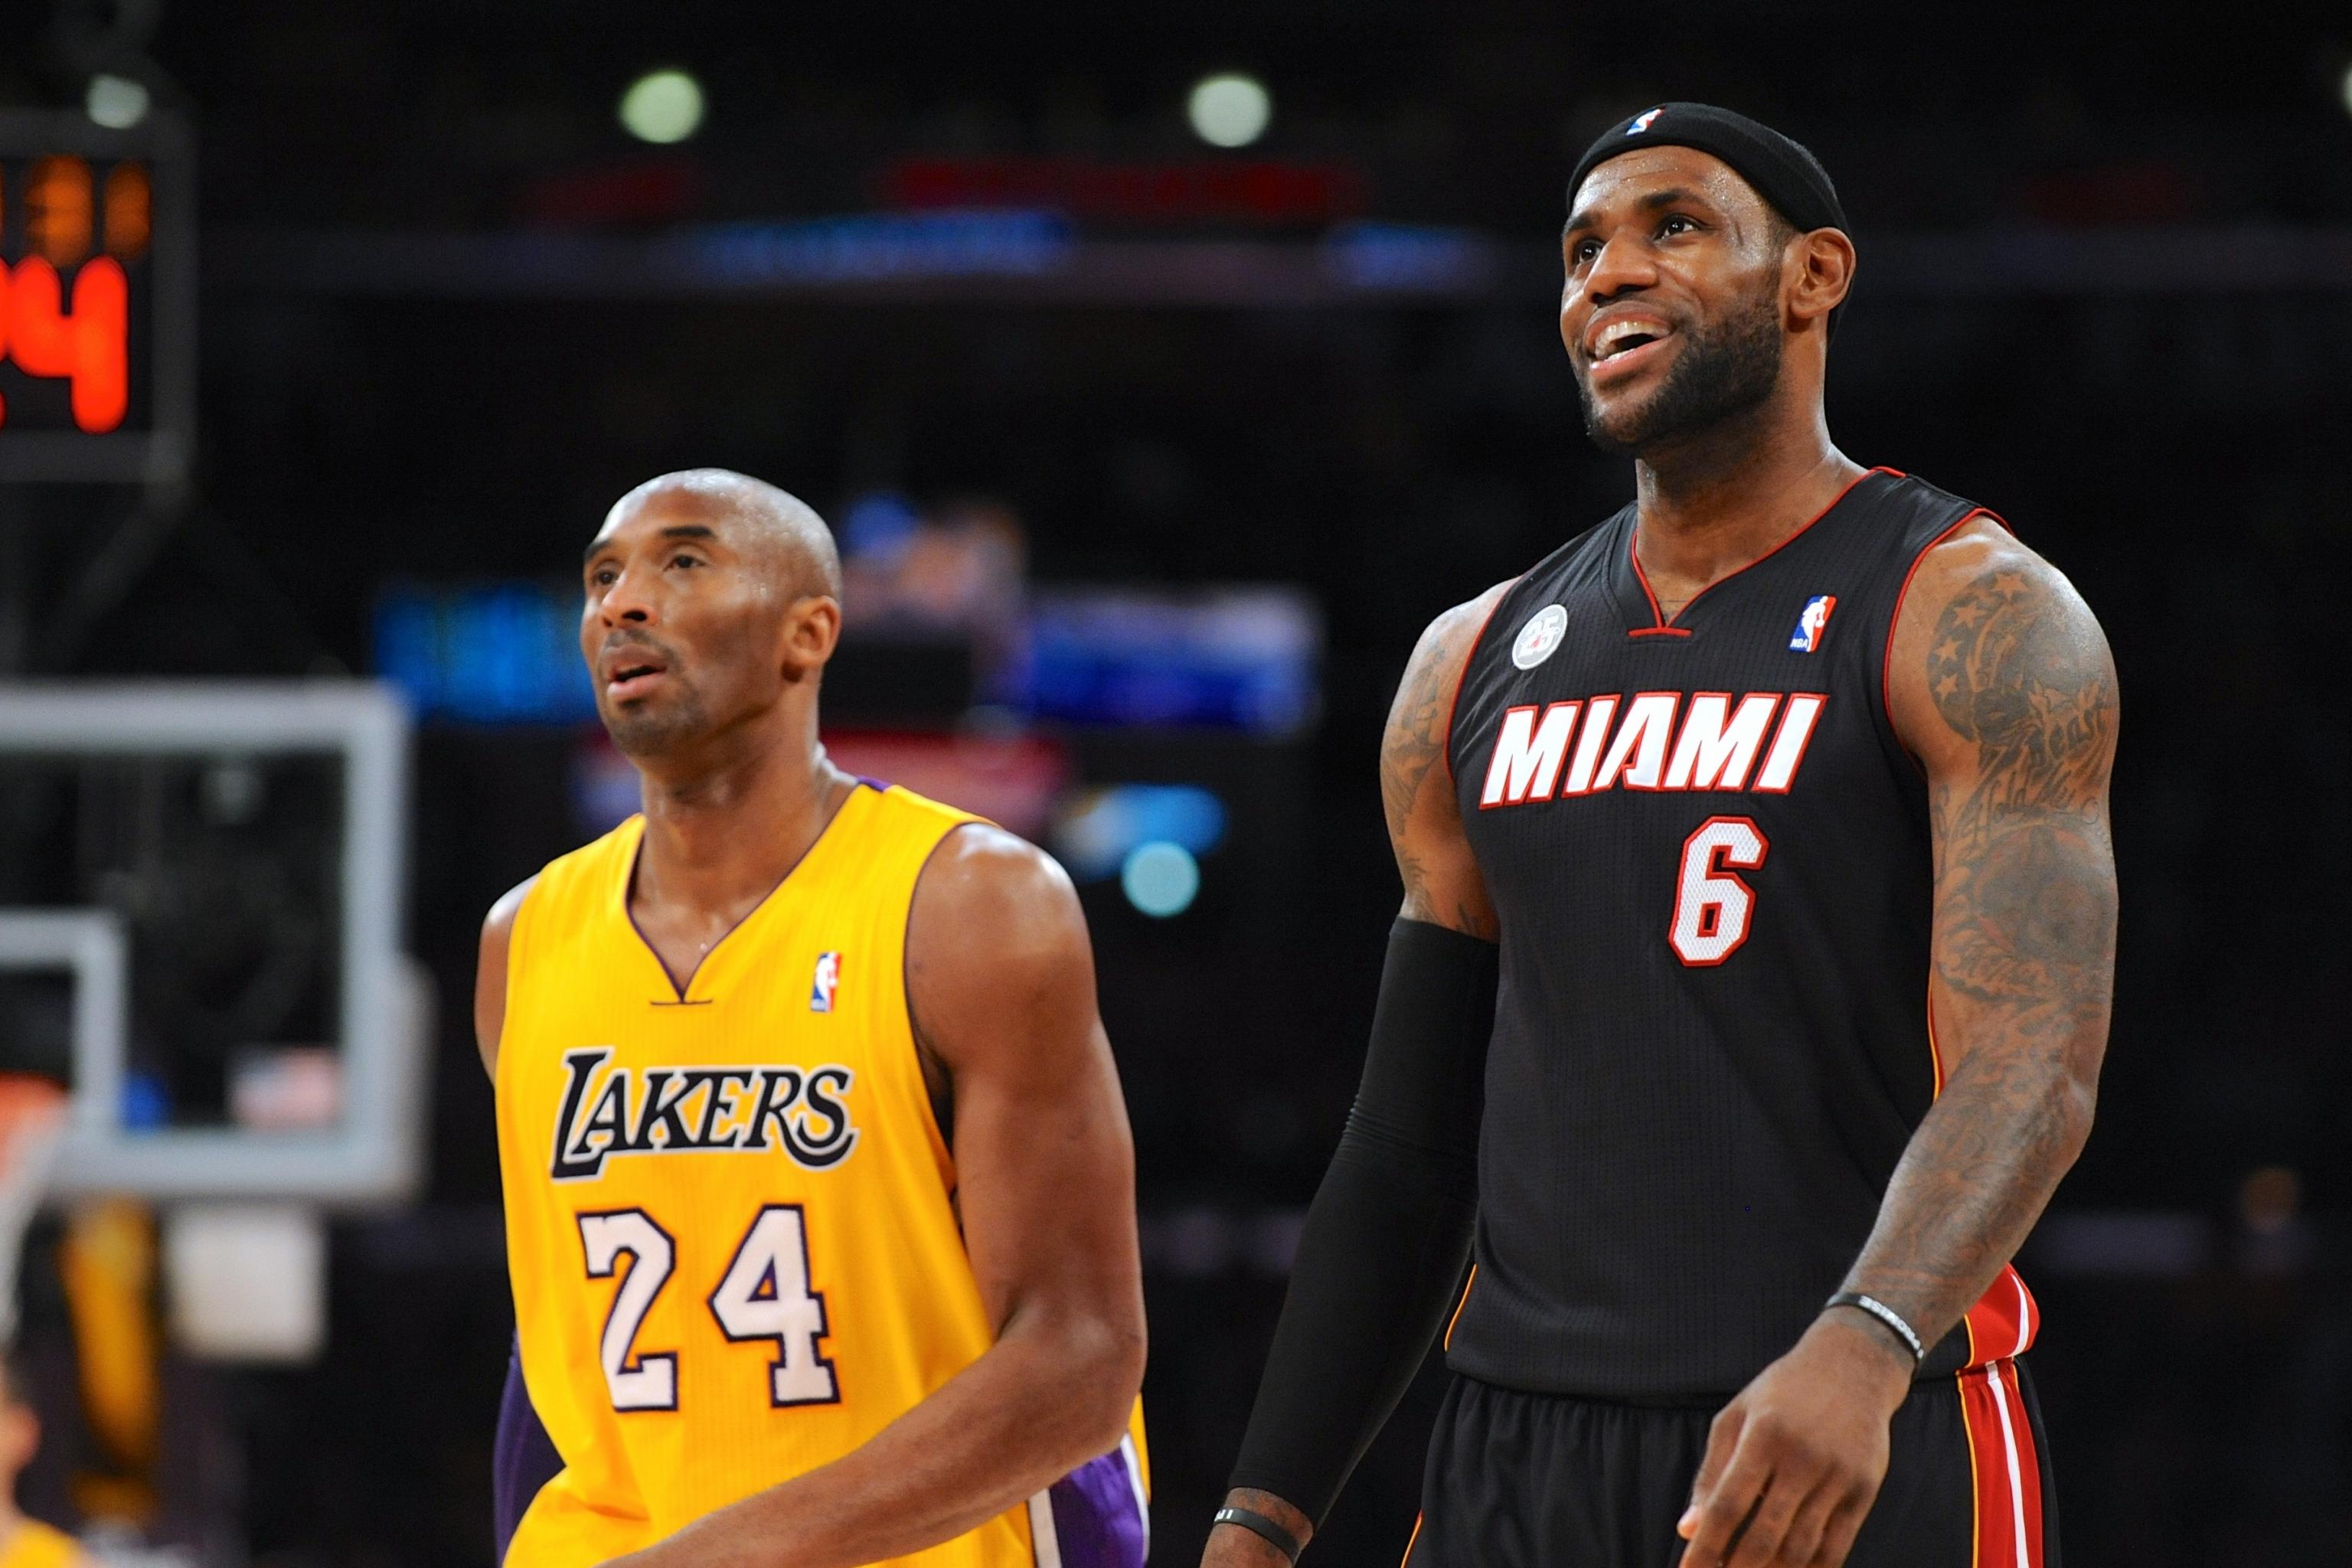 NBA Salaries and Endorsements: How Much the Top Players Like Kobe